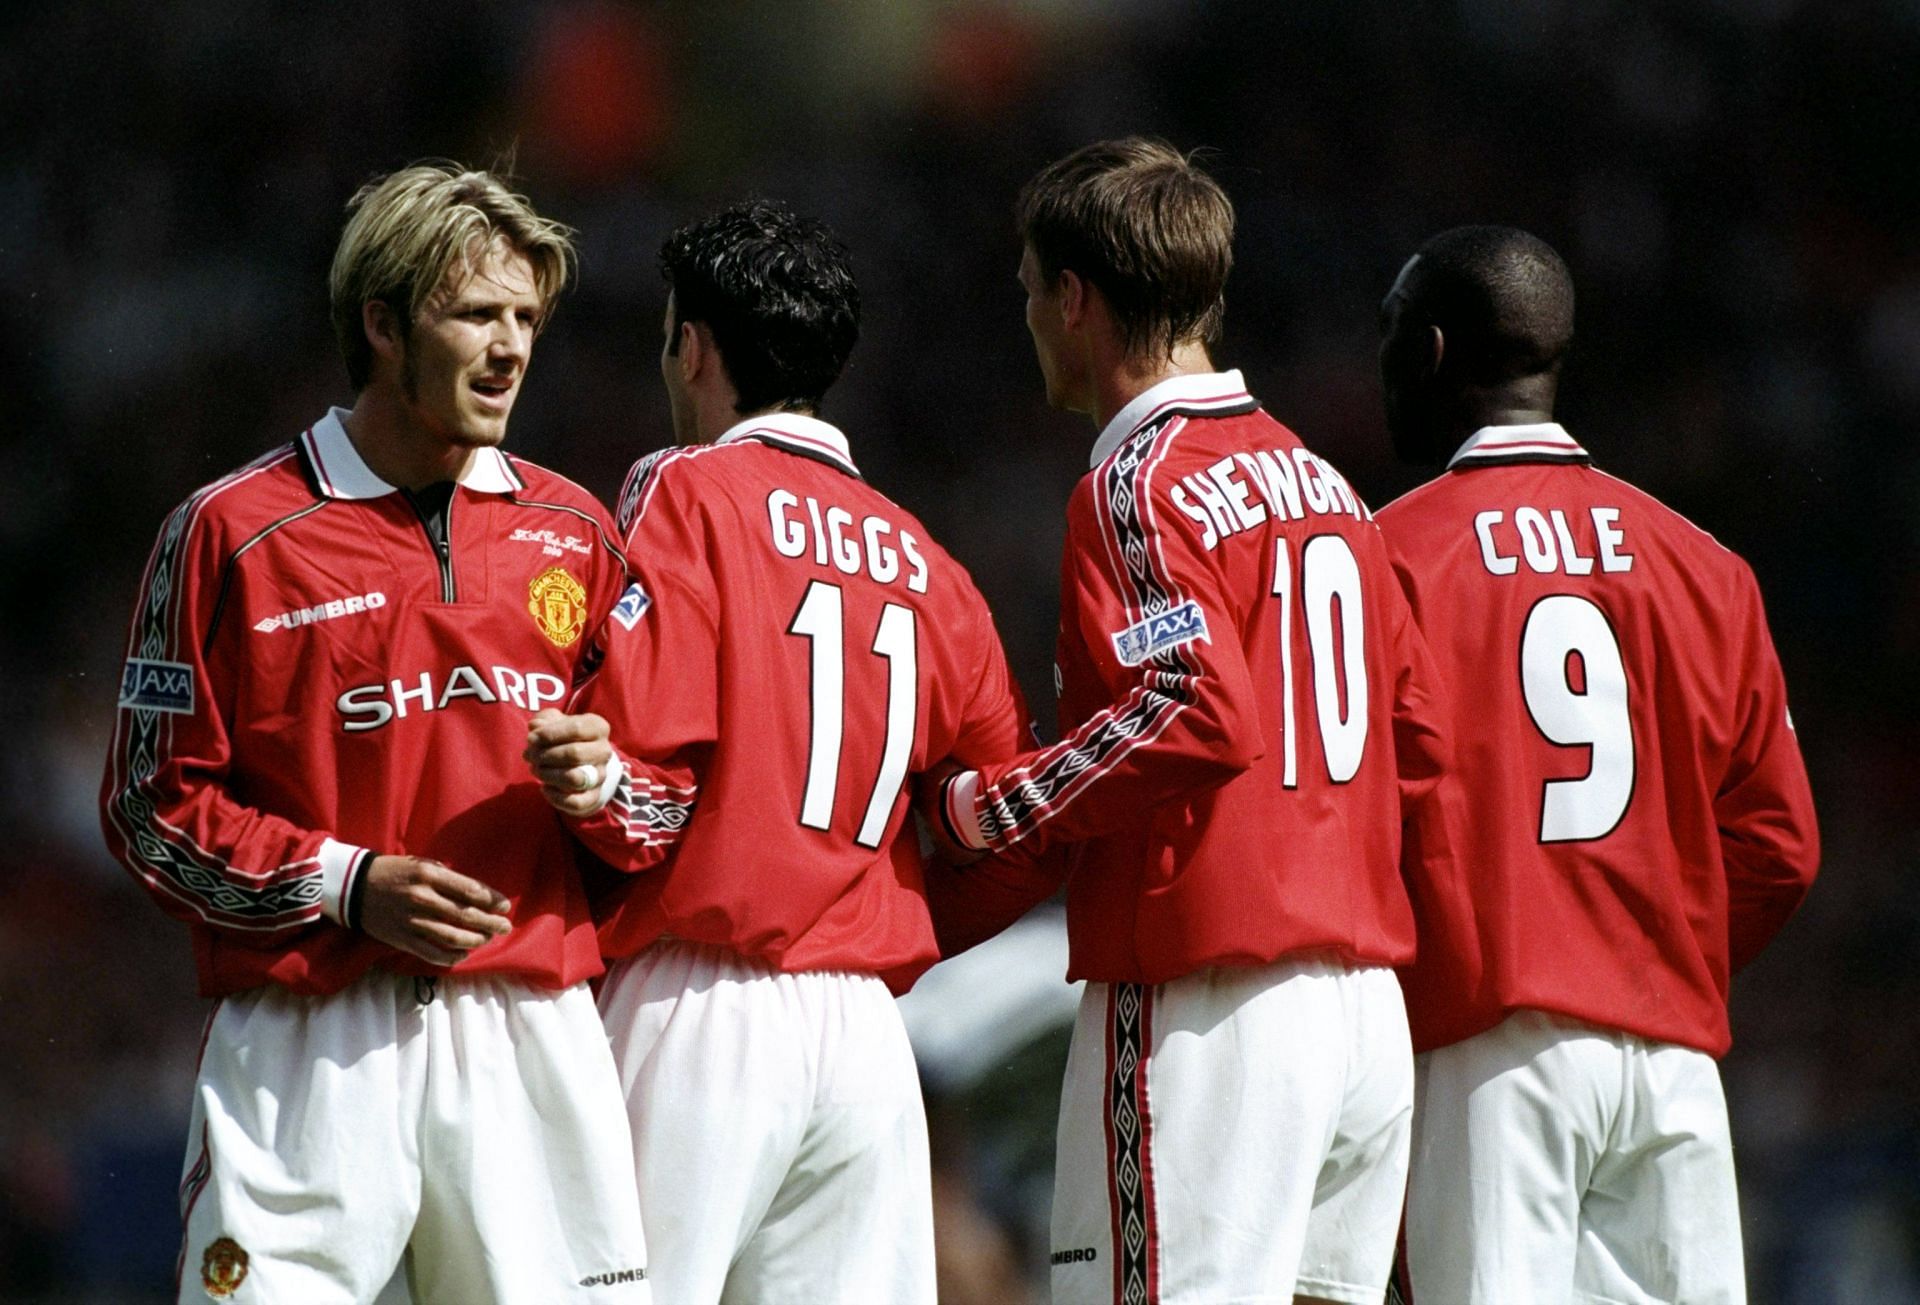 Teddy Sheringham and Andy Cole scored some important goals for Manchester United